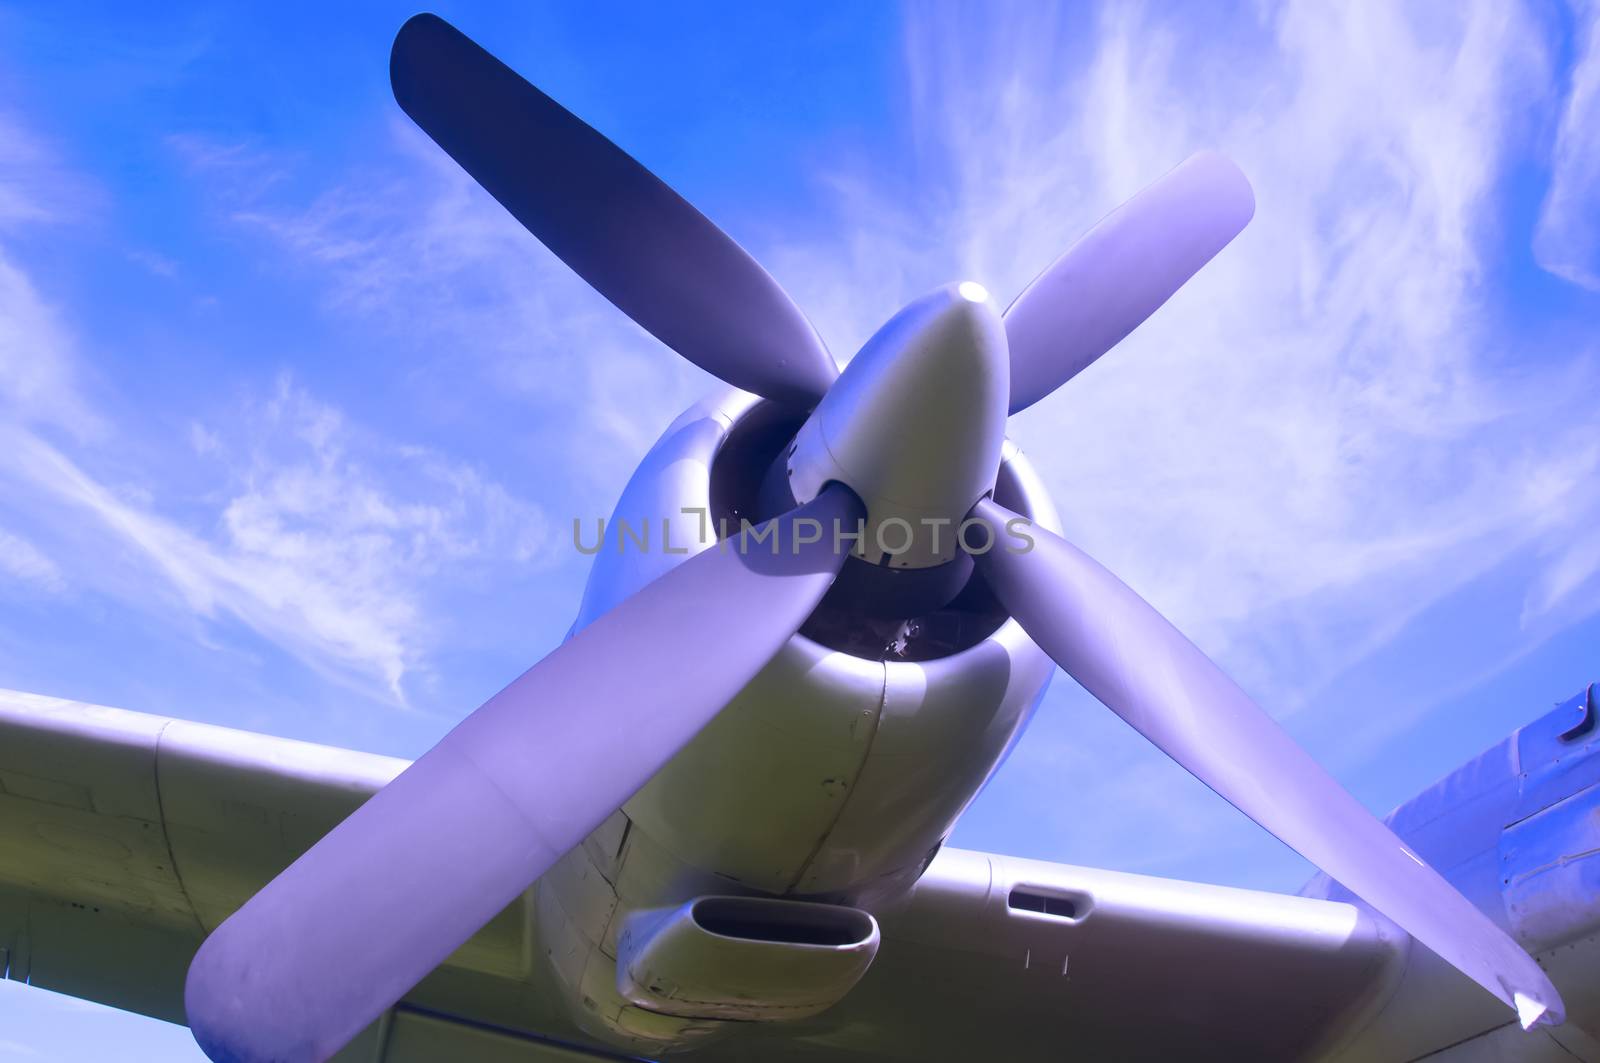 Aircraft propeller on the wing, blue sky background